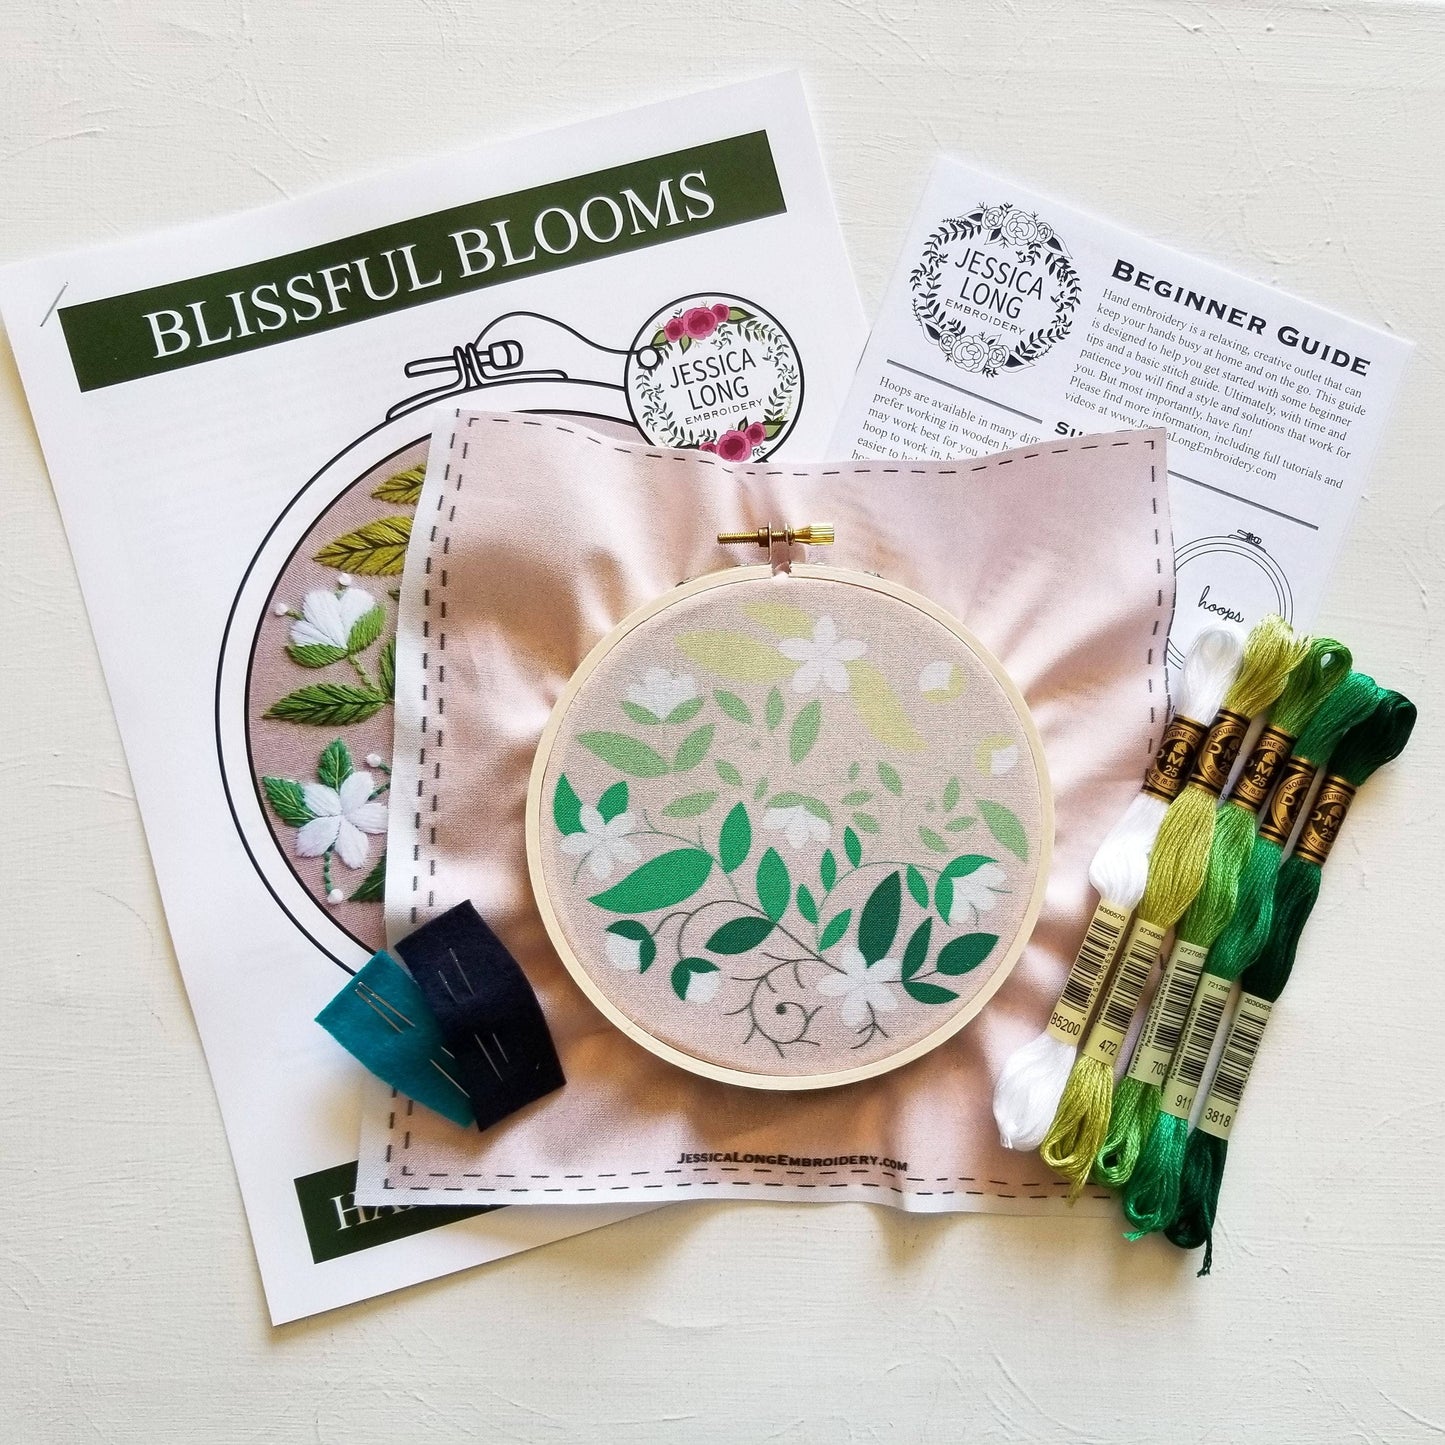 Jessica Long Embroidery - Blissful Blooms Beginner Embroidery Kit